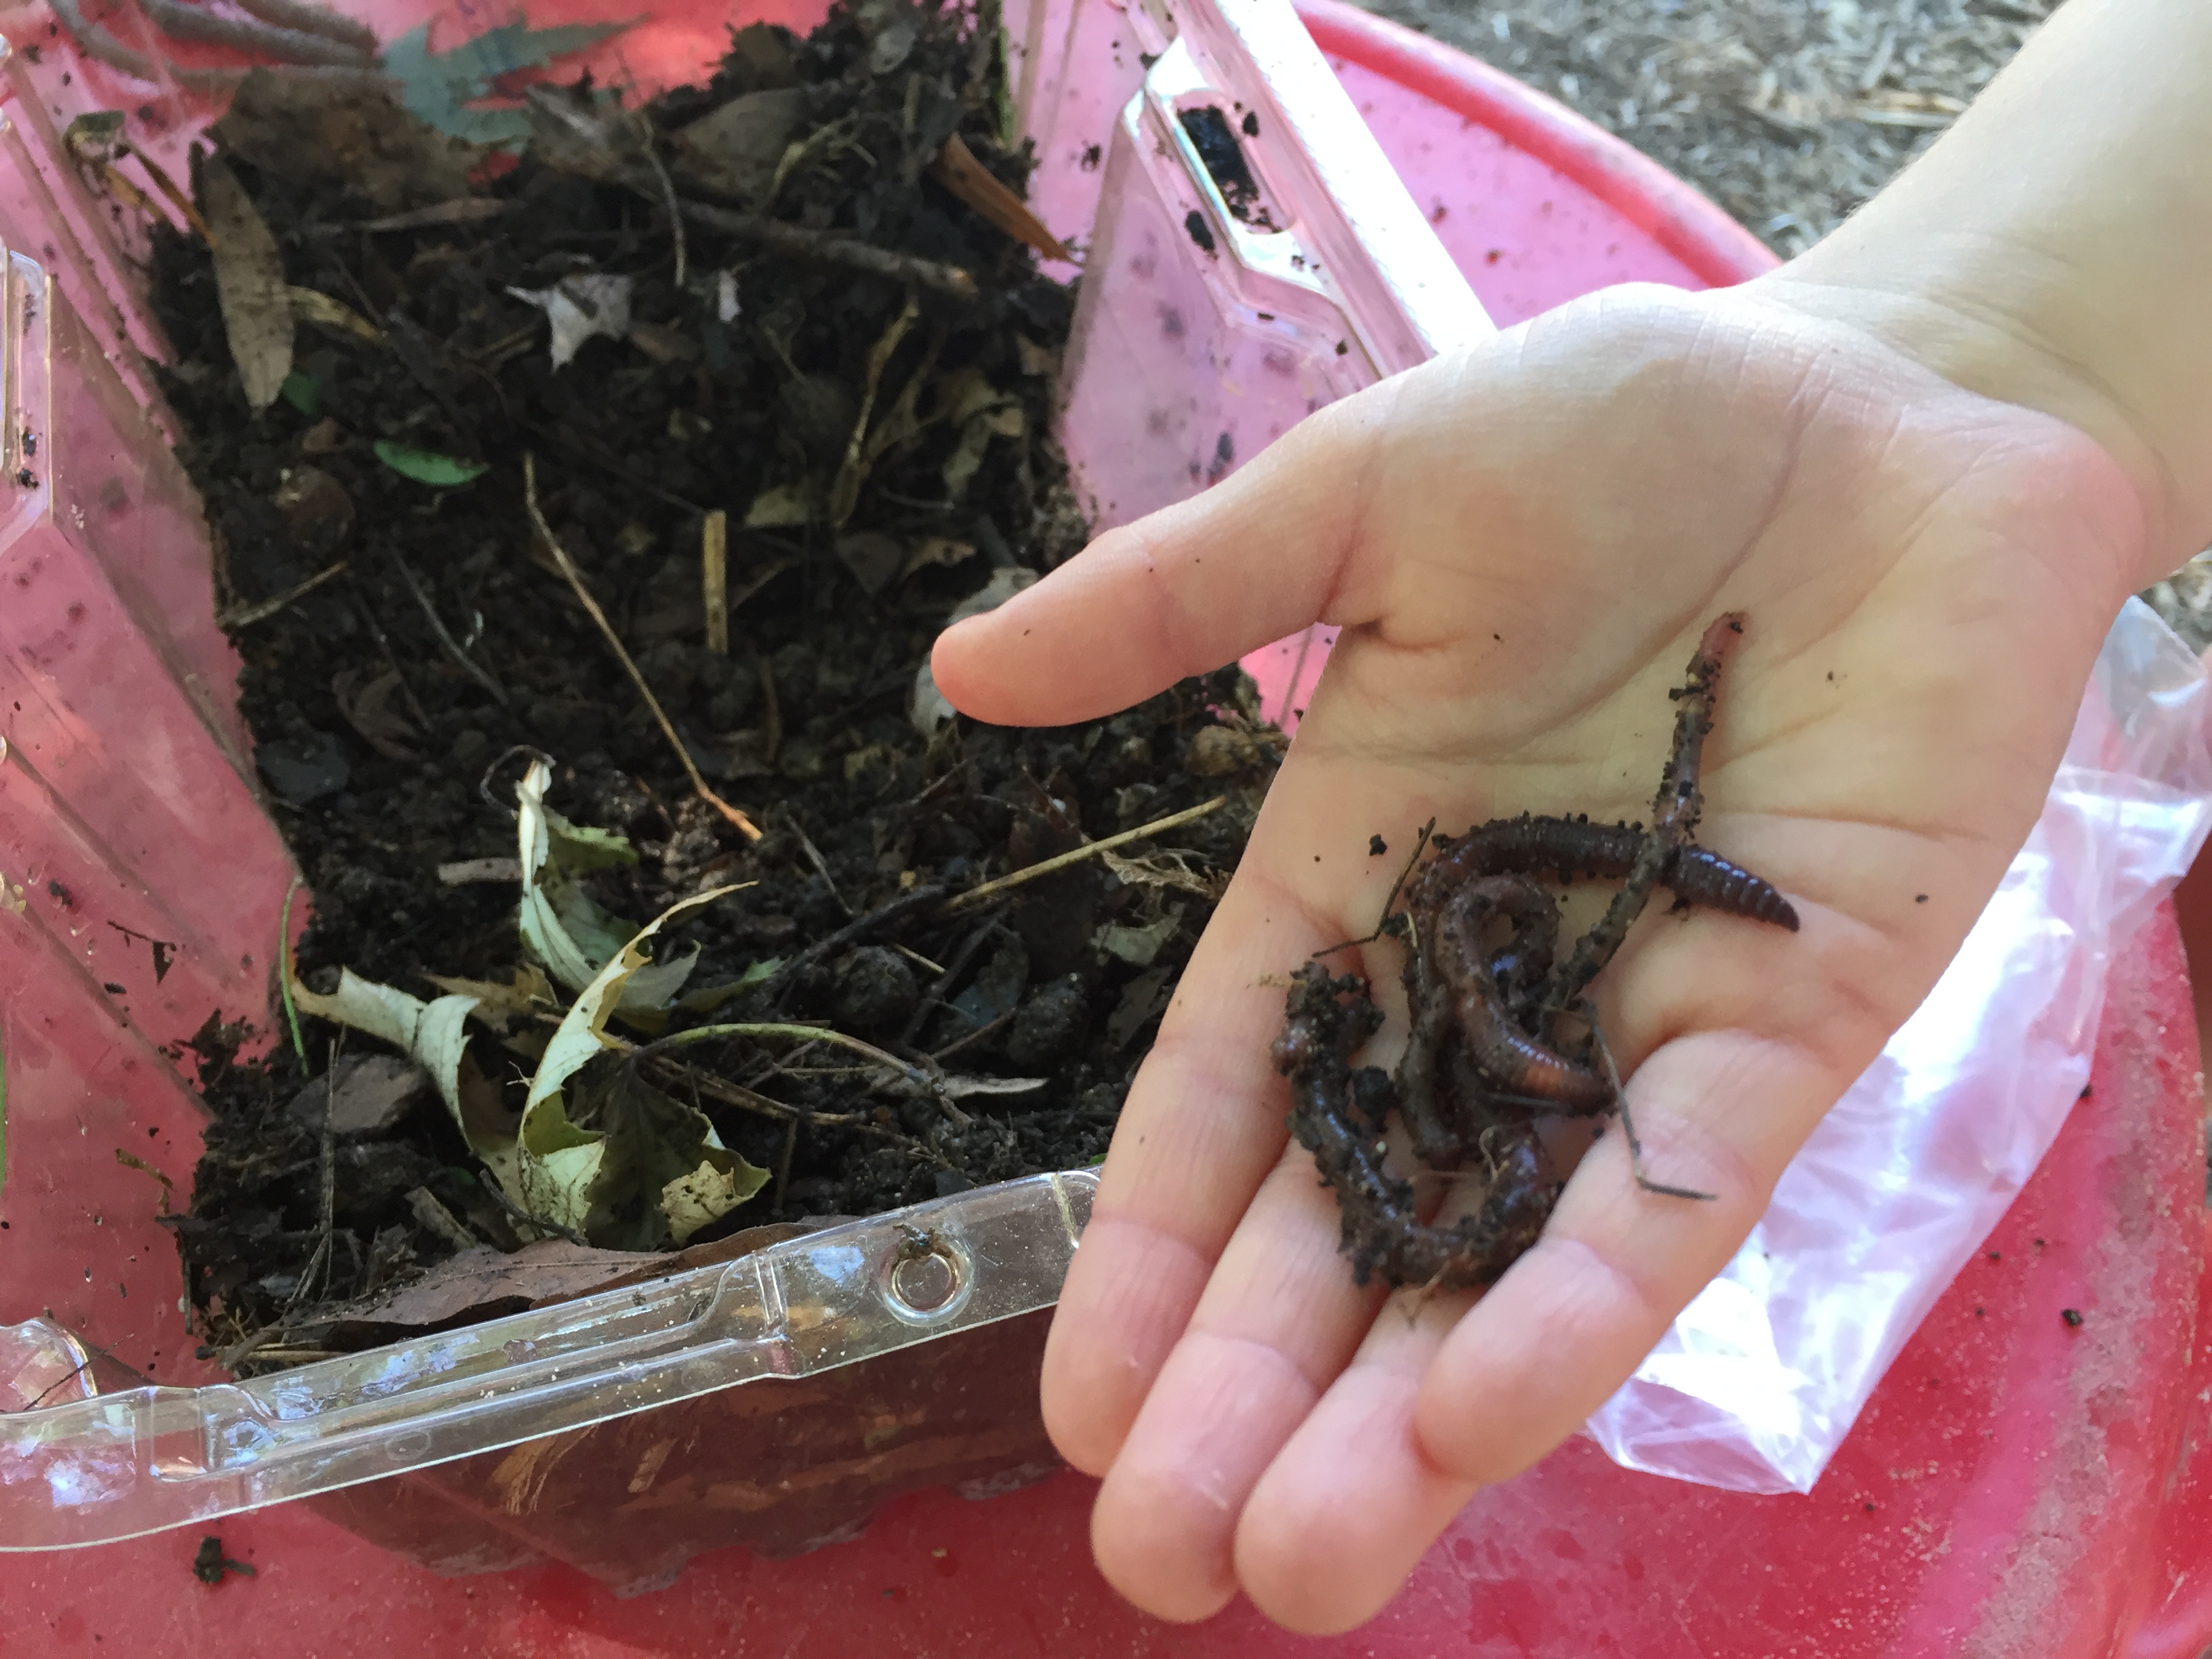 Child holds several earthworms in hand